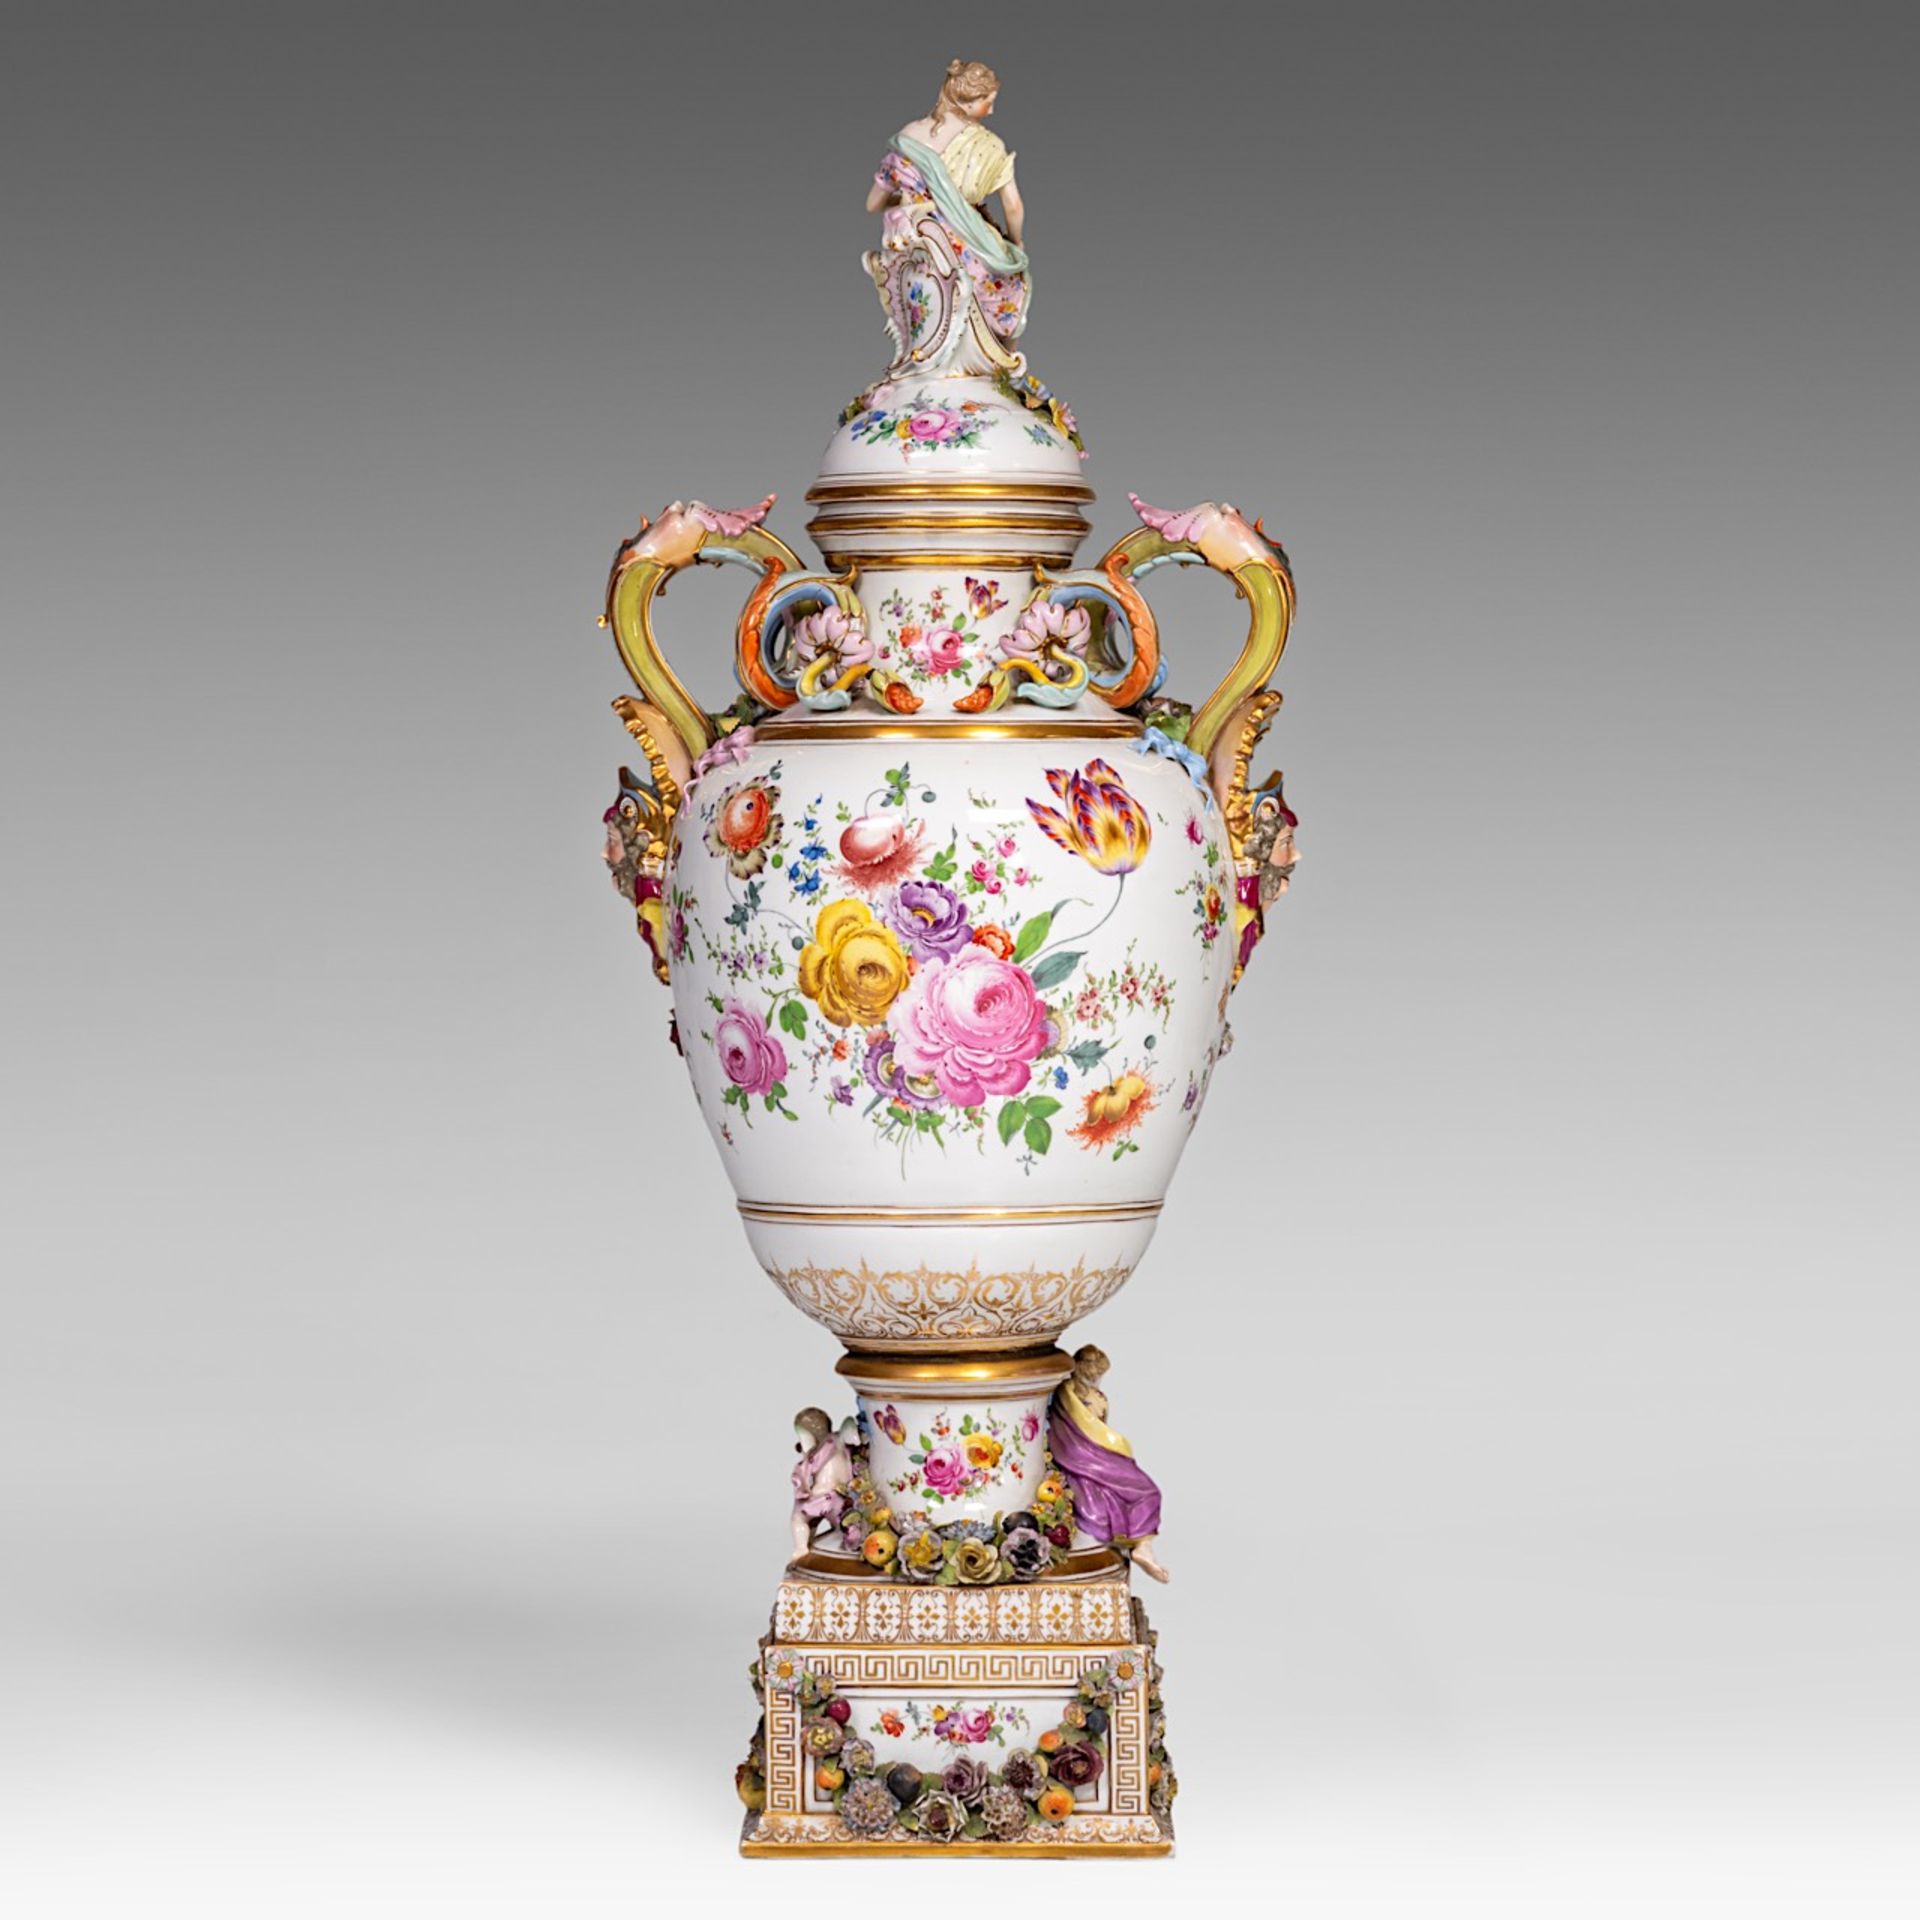 A very imposing Saxony porcelain vase on stand, Postschappel manufactory, Dresden, H 107 cm (total) - Image 4 of 23